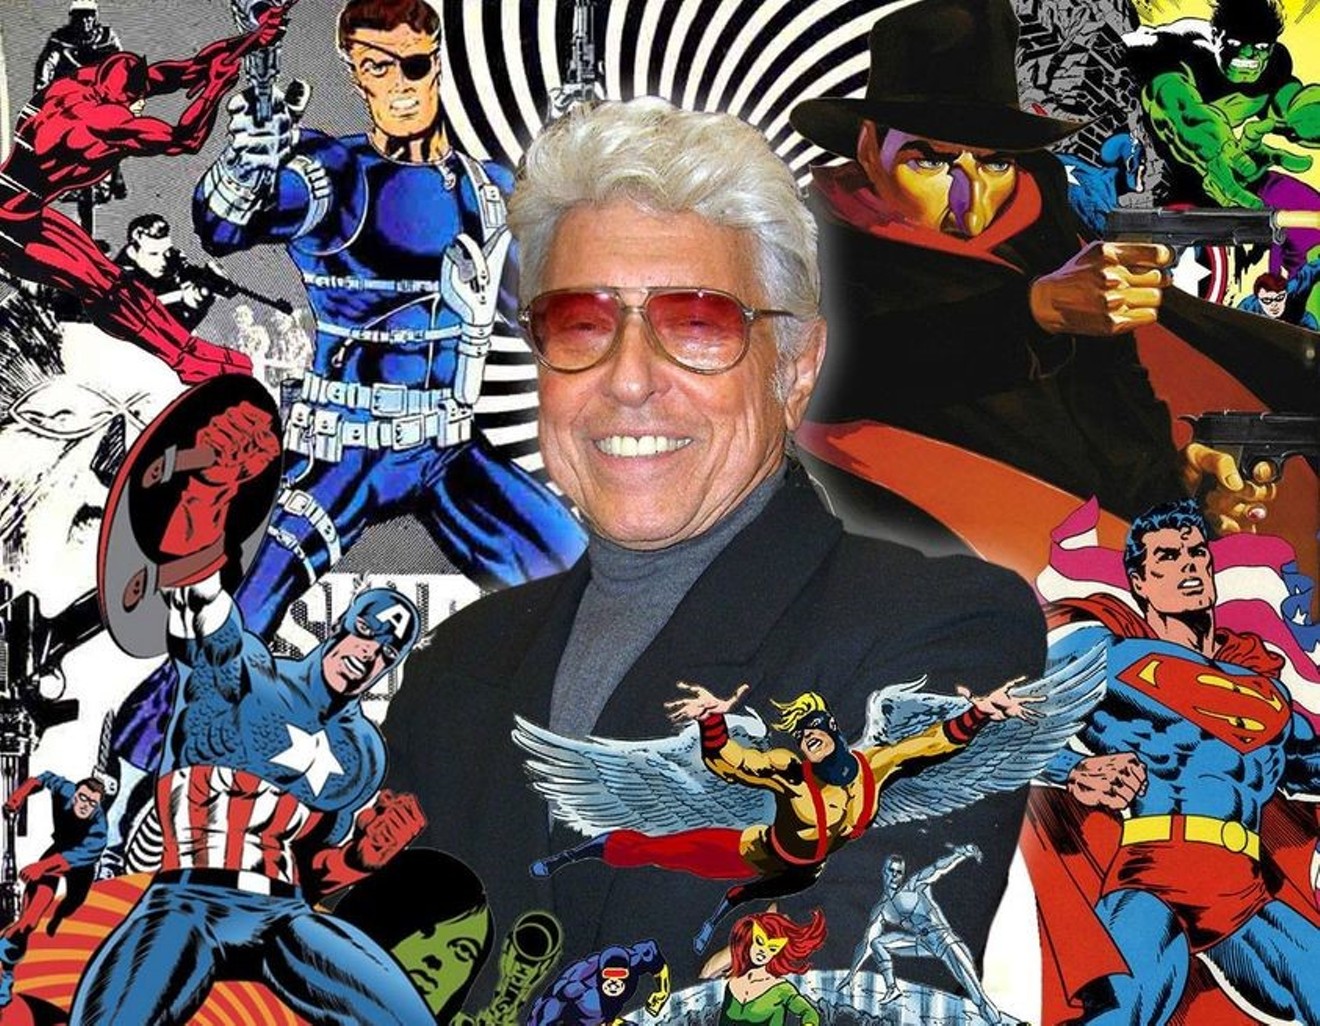 The always-dapper Jim Steranko and his comic oeuvre.